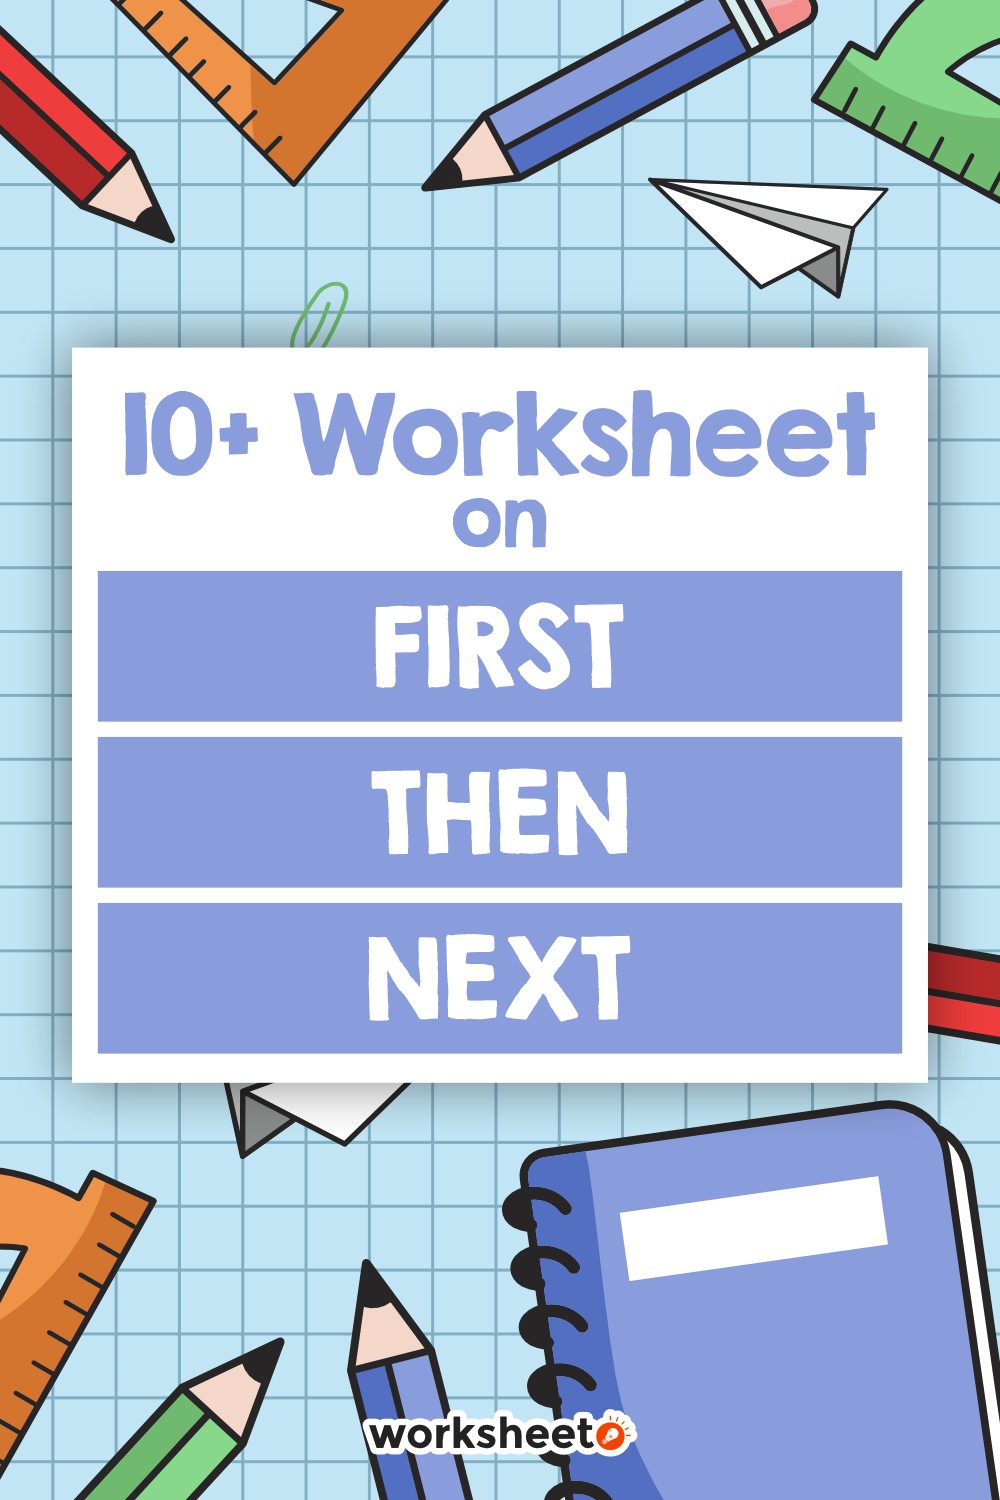 16 Images of Worksheet On First Then Next